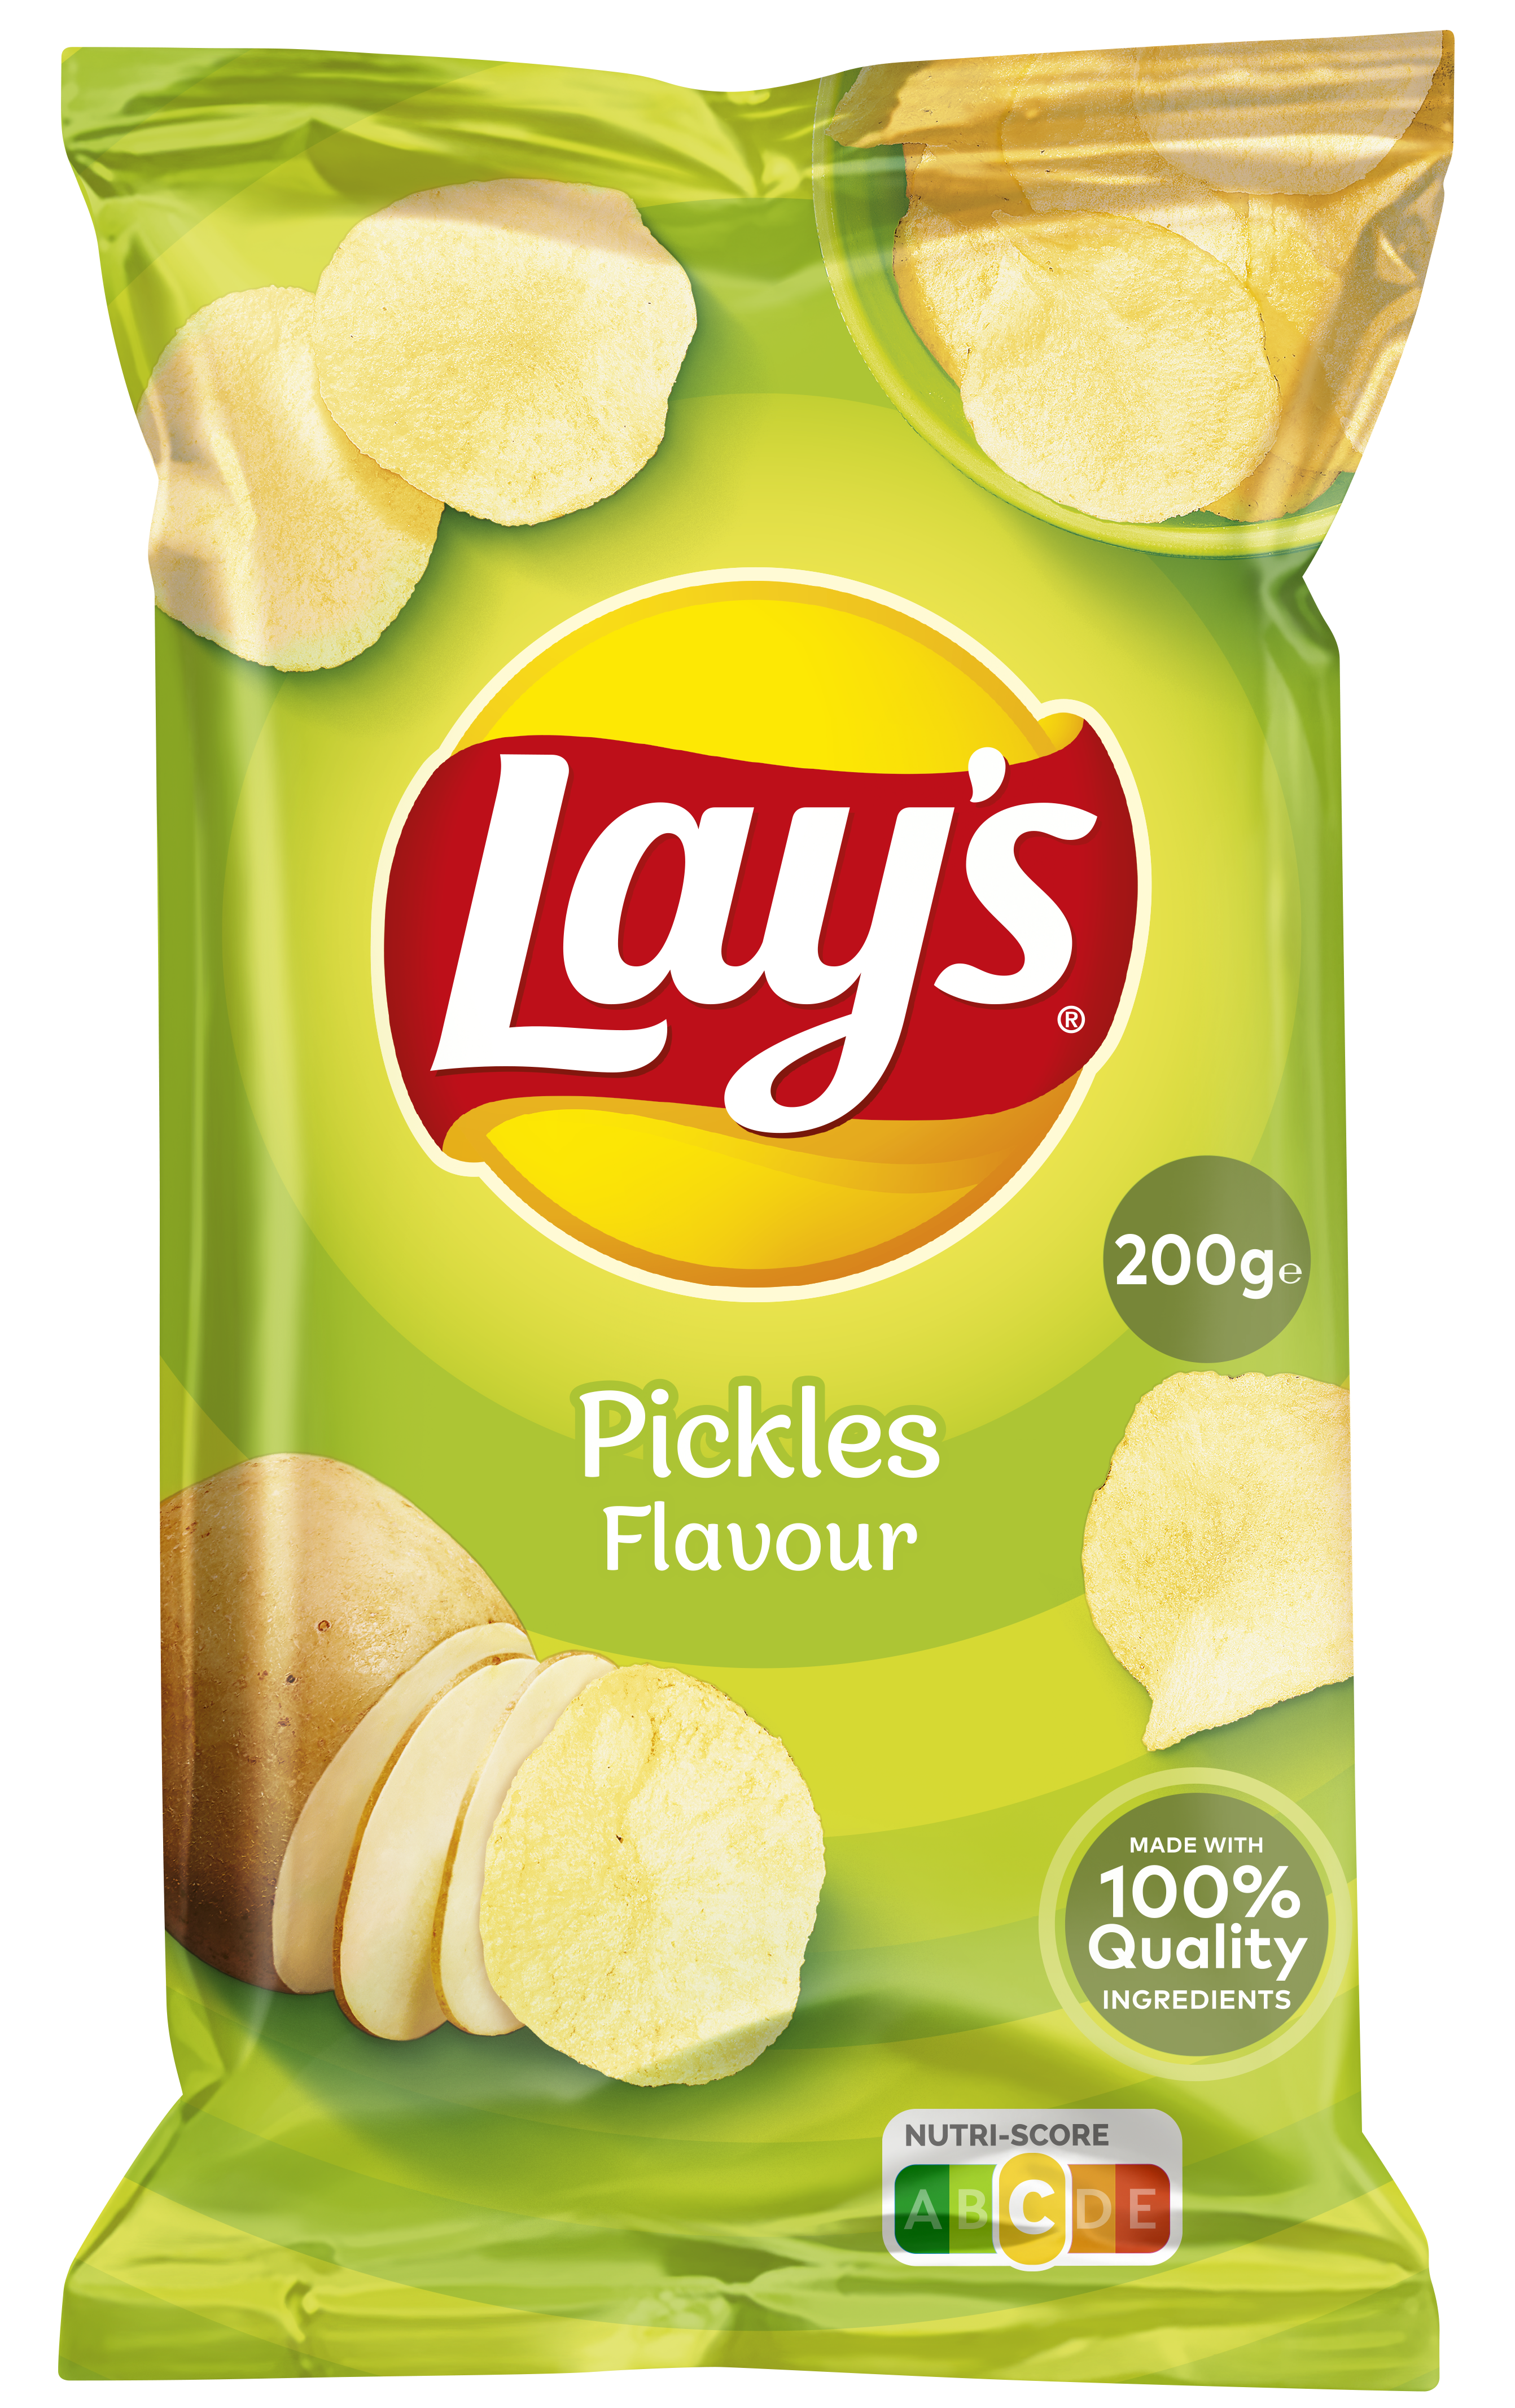 Lay's Pickles